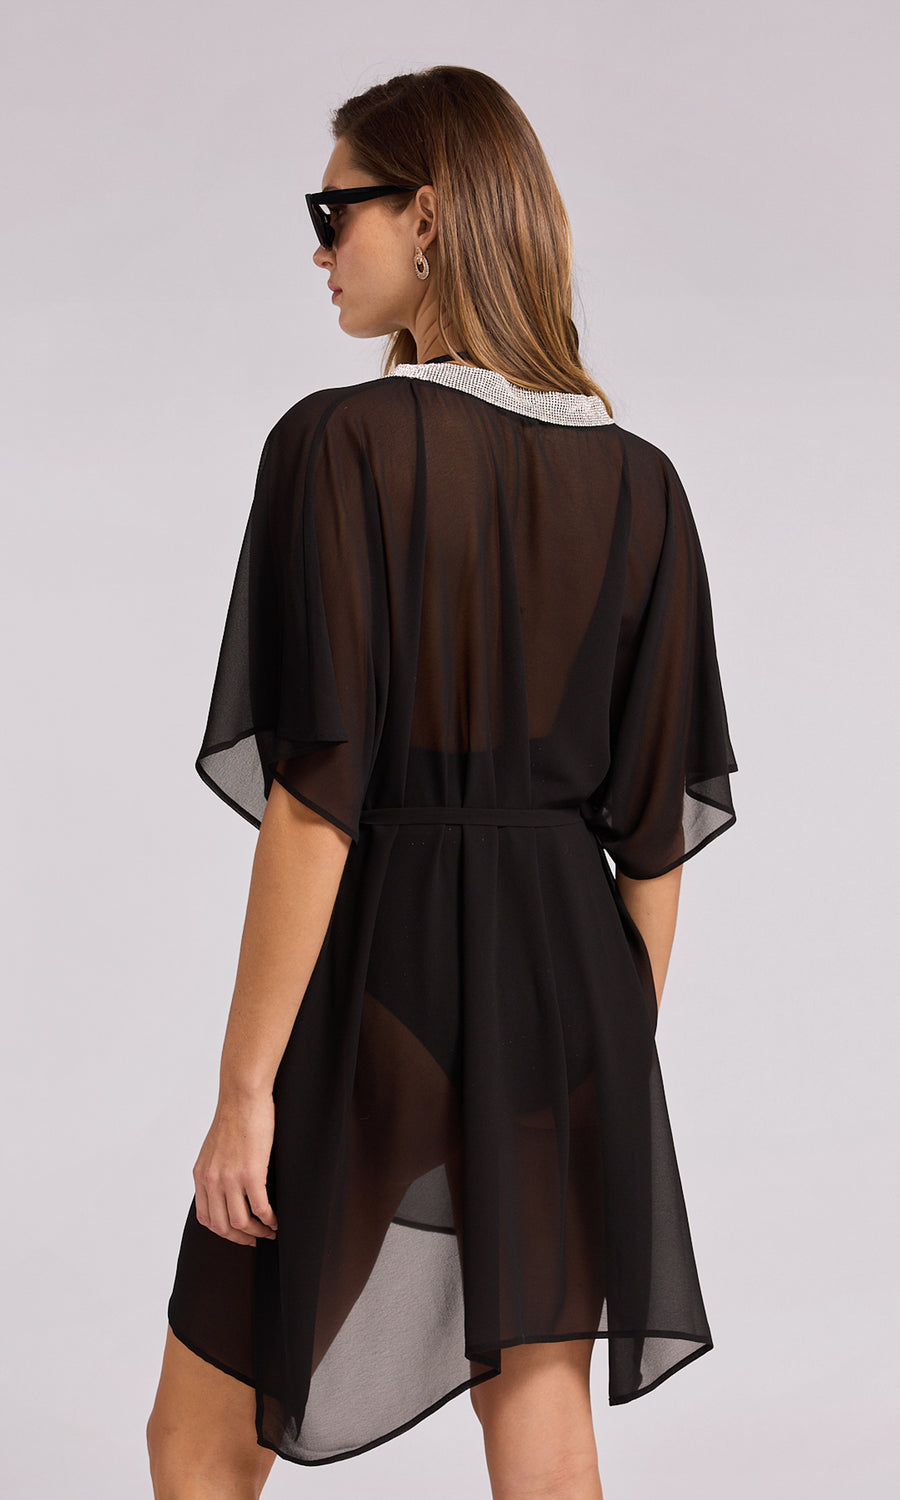 Bria Crystal Cover-Up - Black 